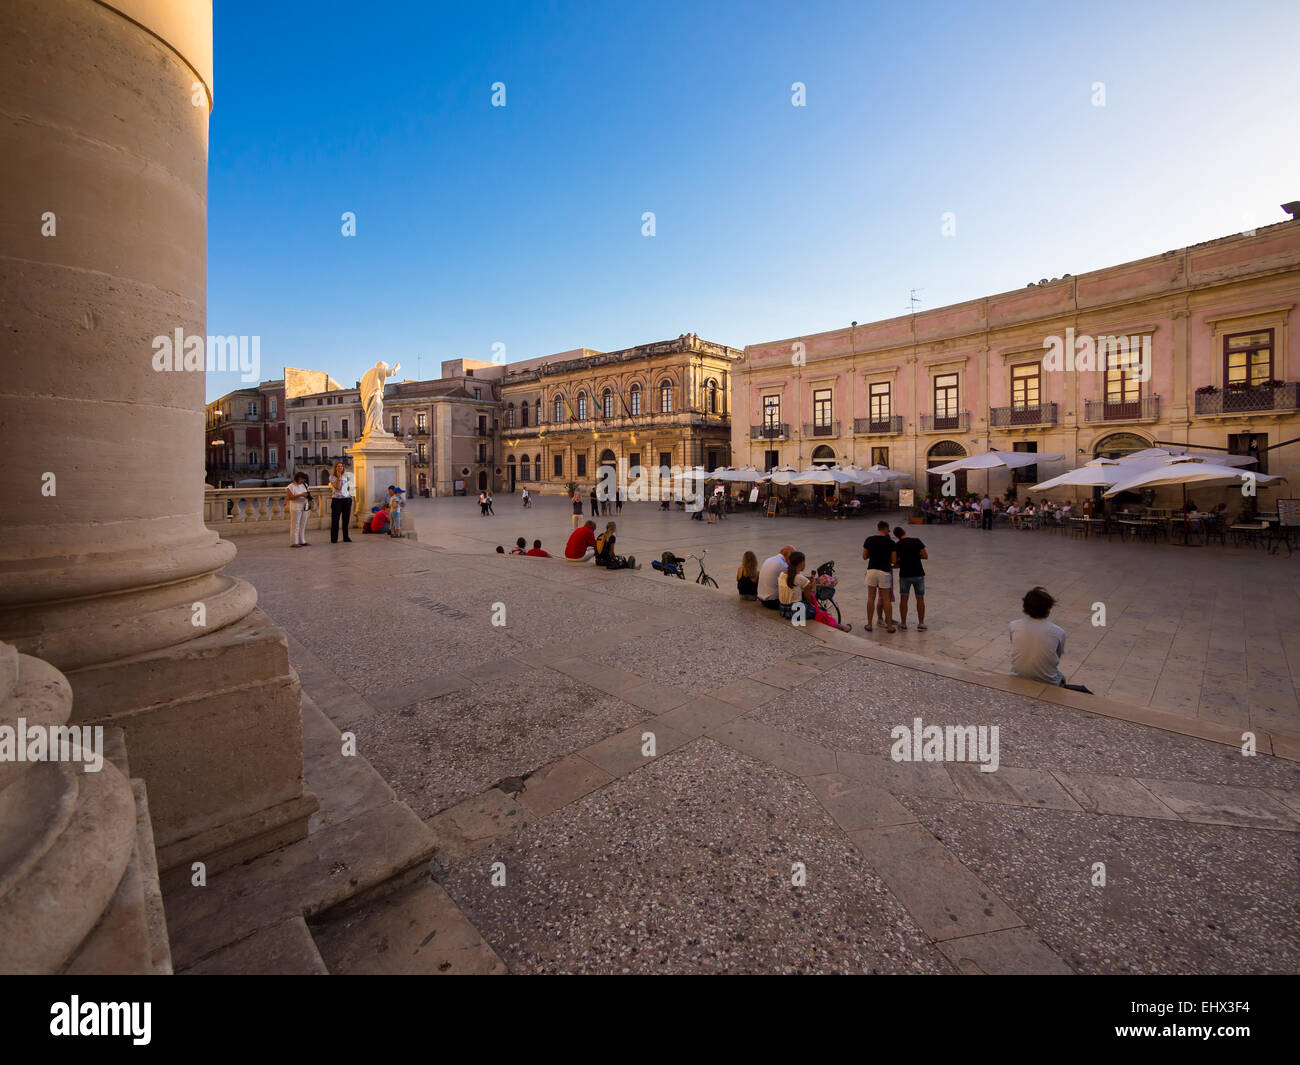 Italy, Sicily, Syracuse, Cathedral Santa Maria delle Colonne and cathedral square Stock Photo